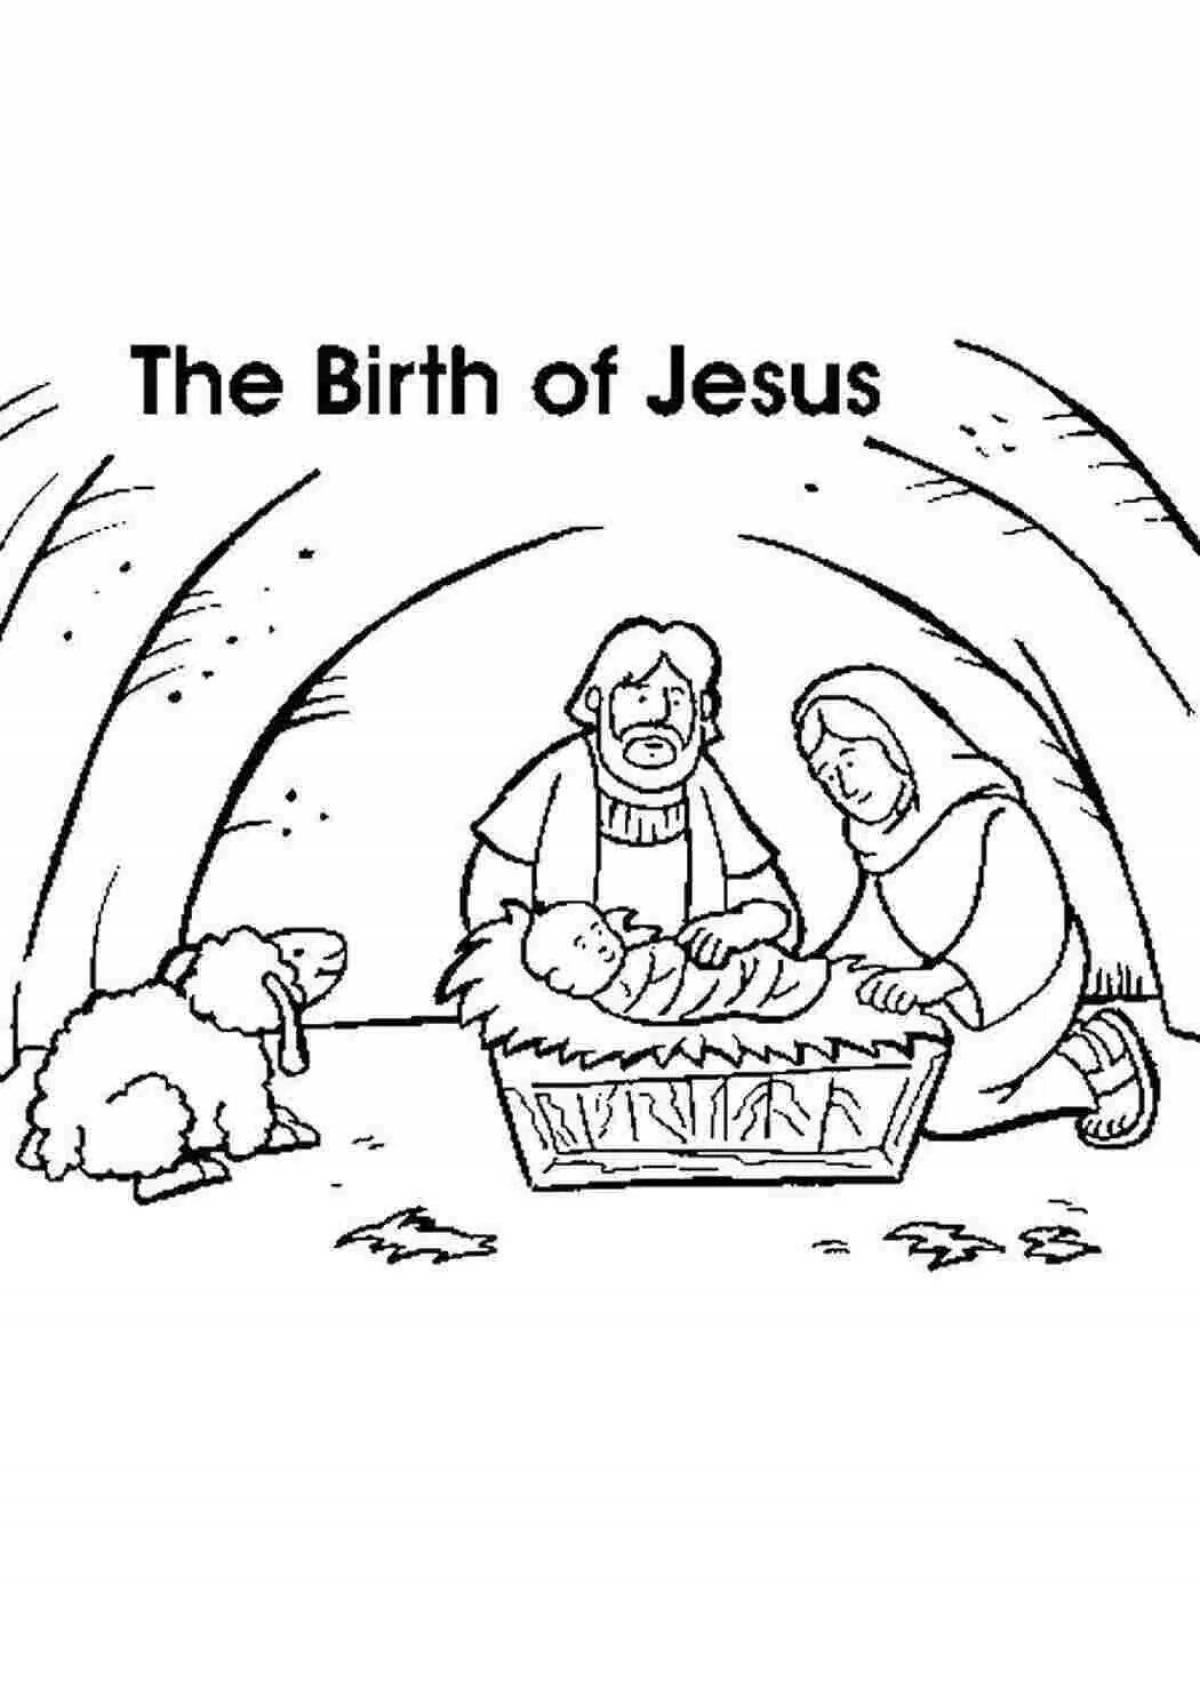 Coloring page divine birth of jesus christ